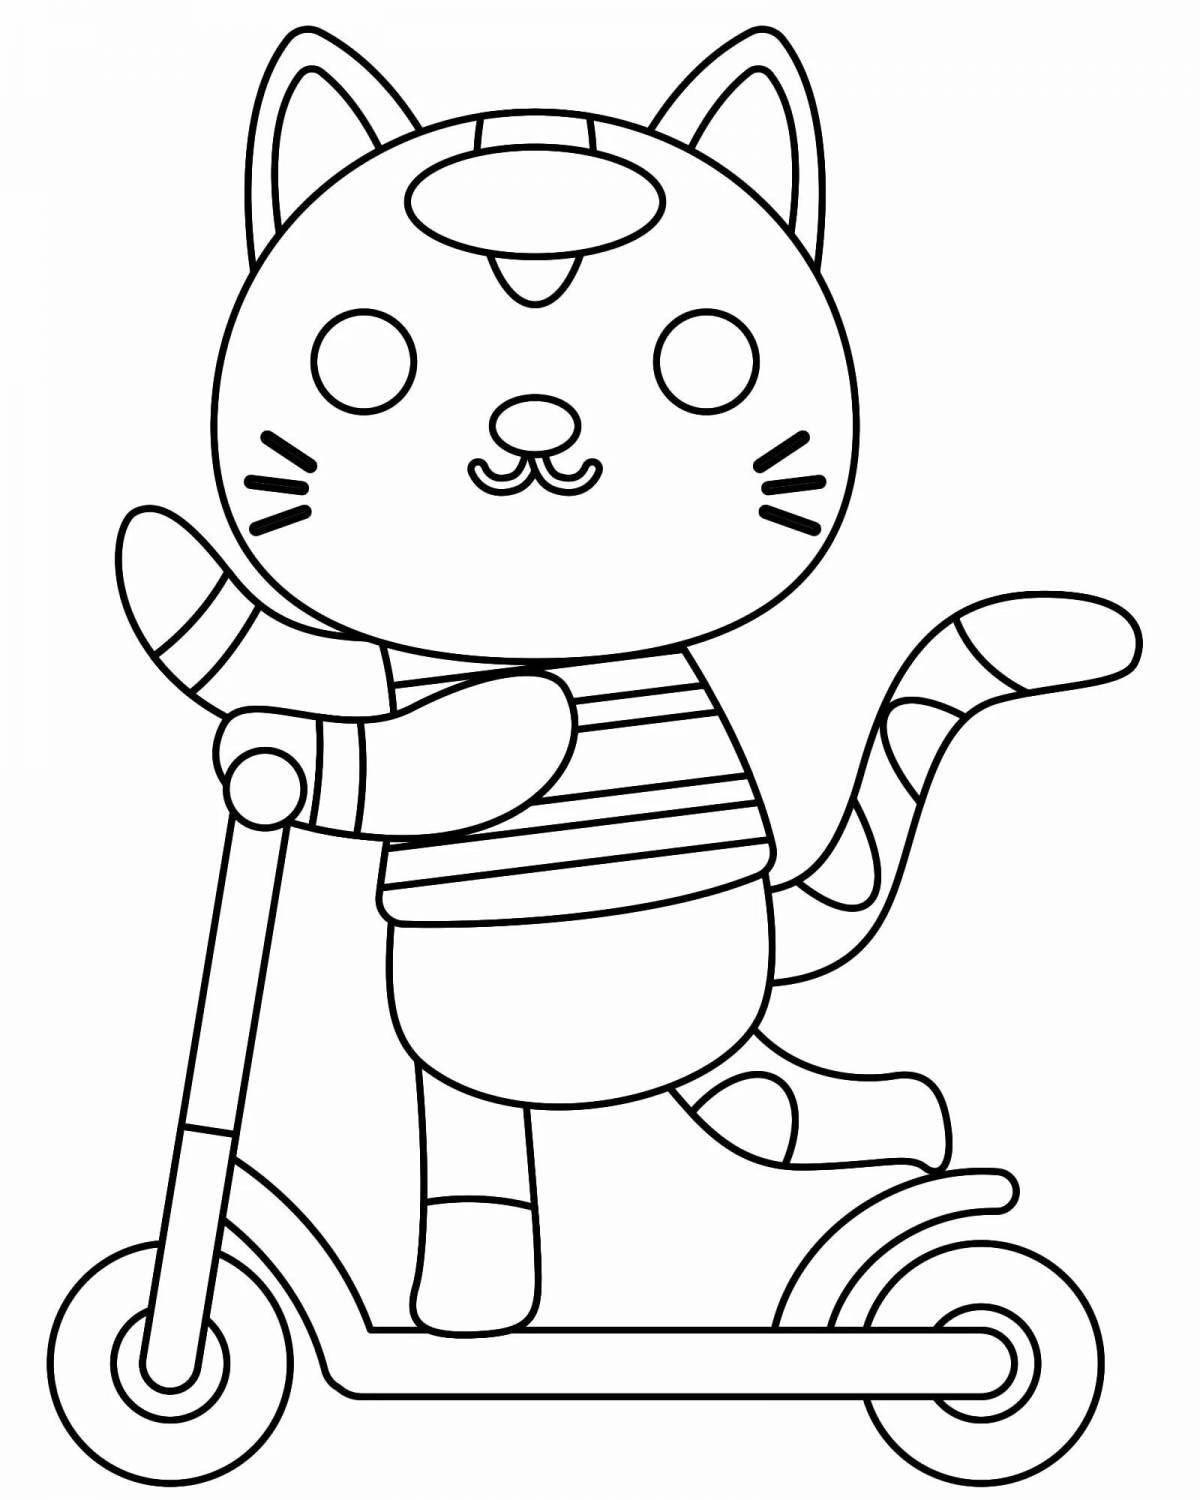 Cute scooter coloring page for kids